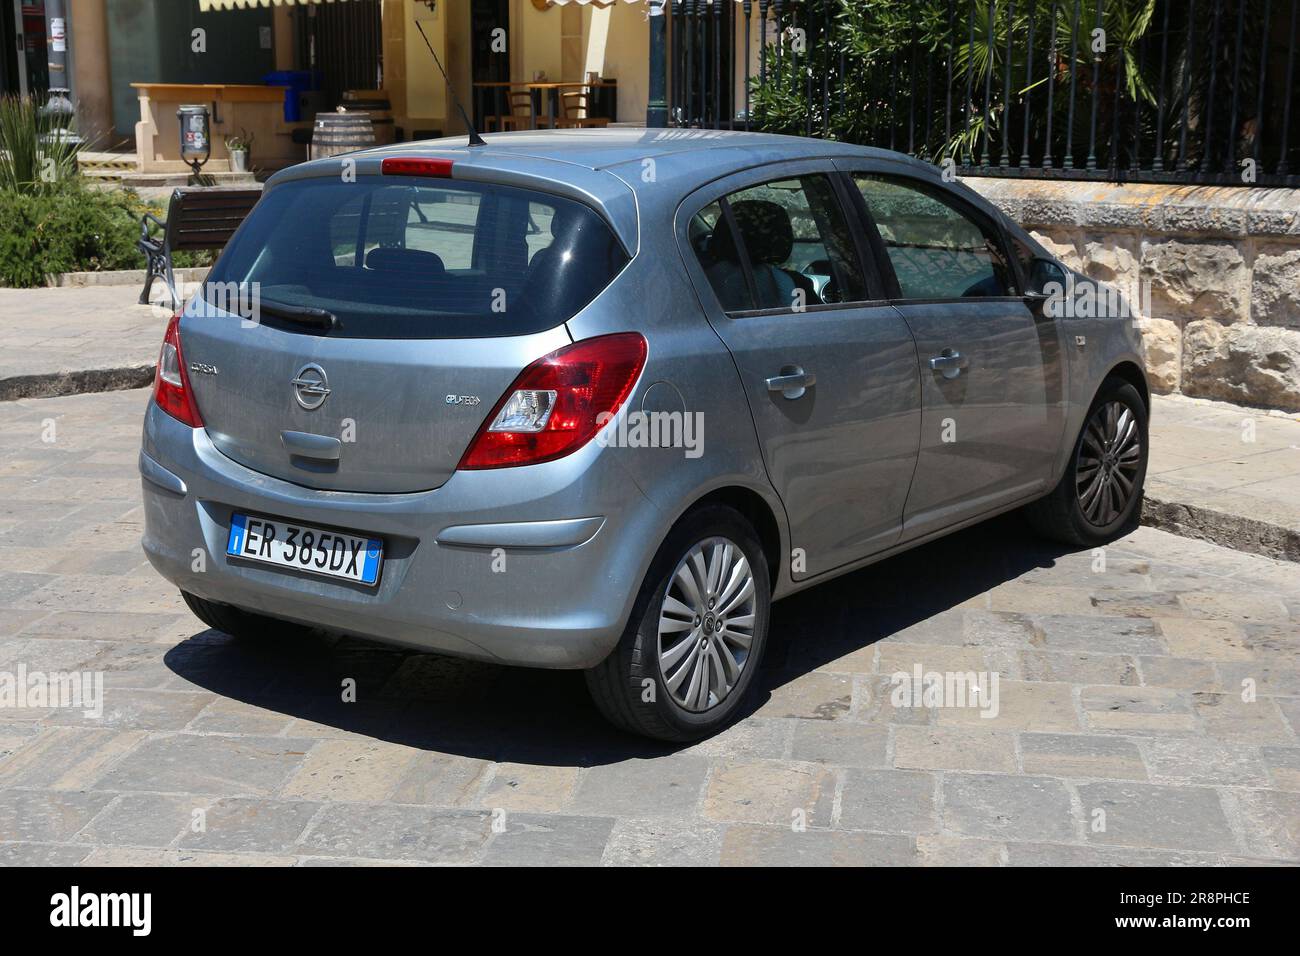 OPEL CORSA opel-corsa-c-tuning Used - the parking